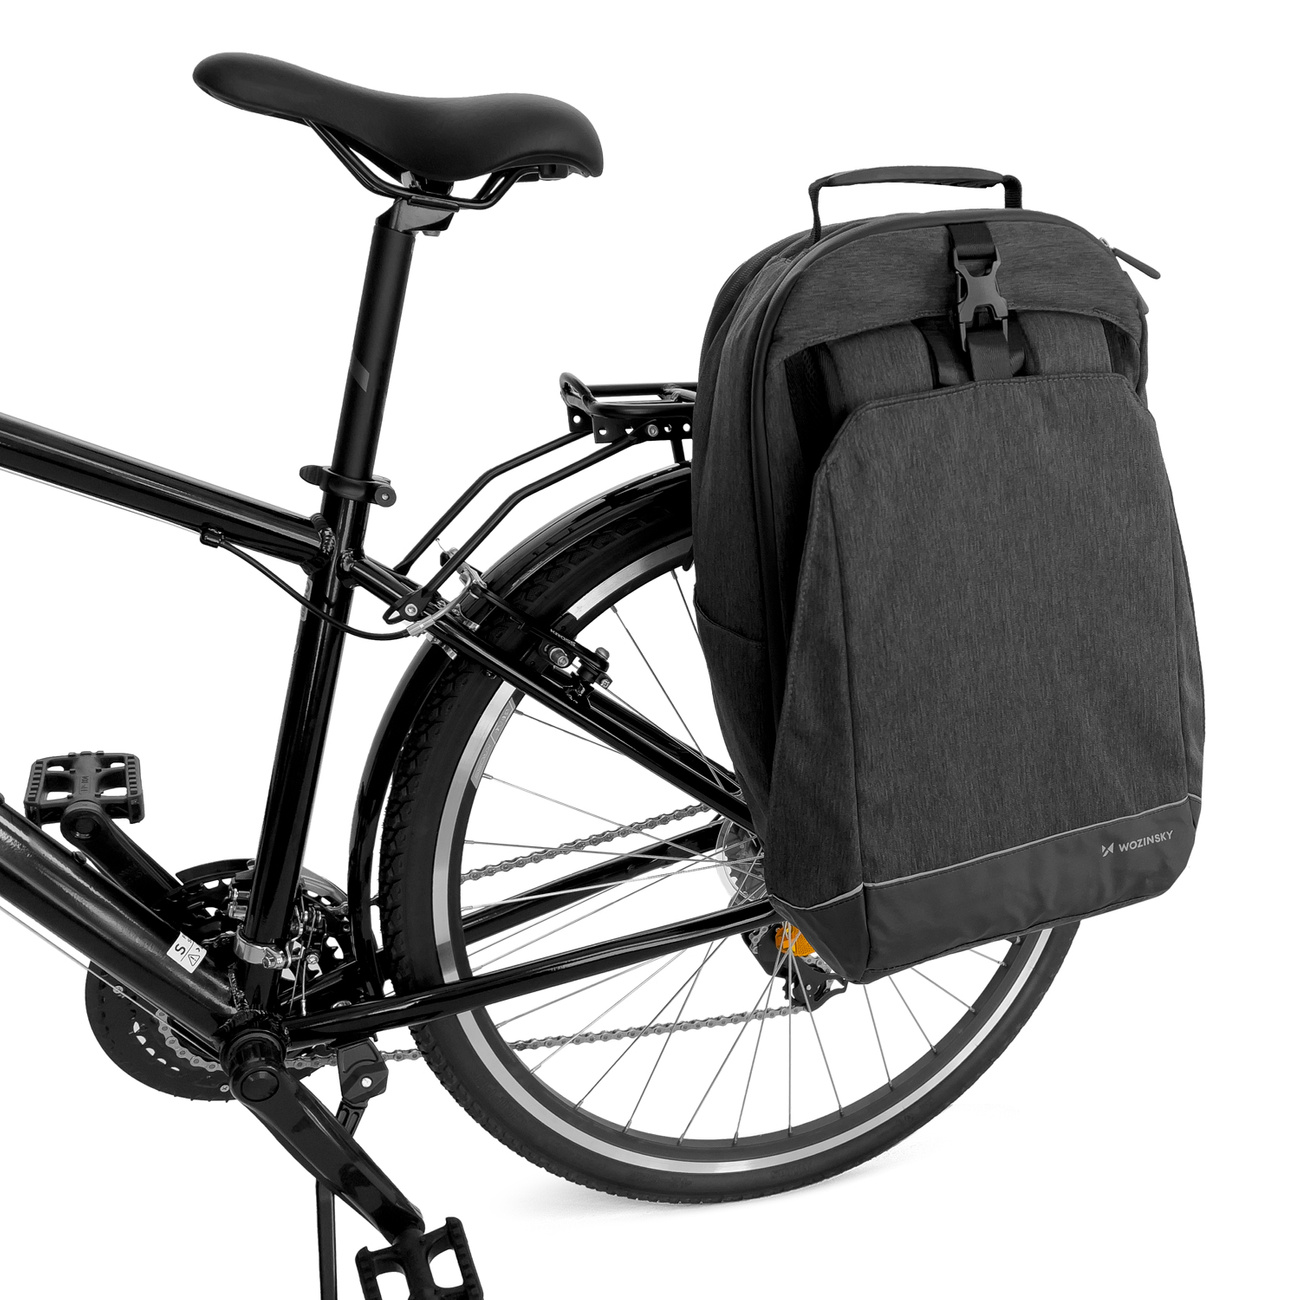 Wozinsky bicycle luggage carrier 30l (WBB33BK) 2in1 B2B black - a bicycle backpack frame with